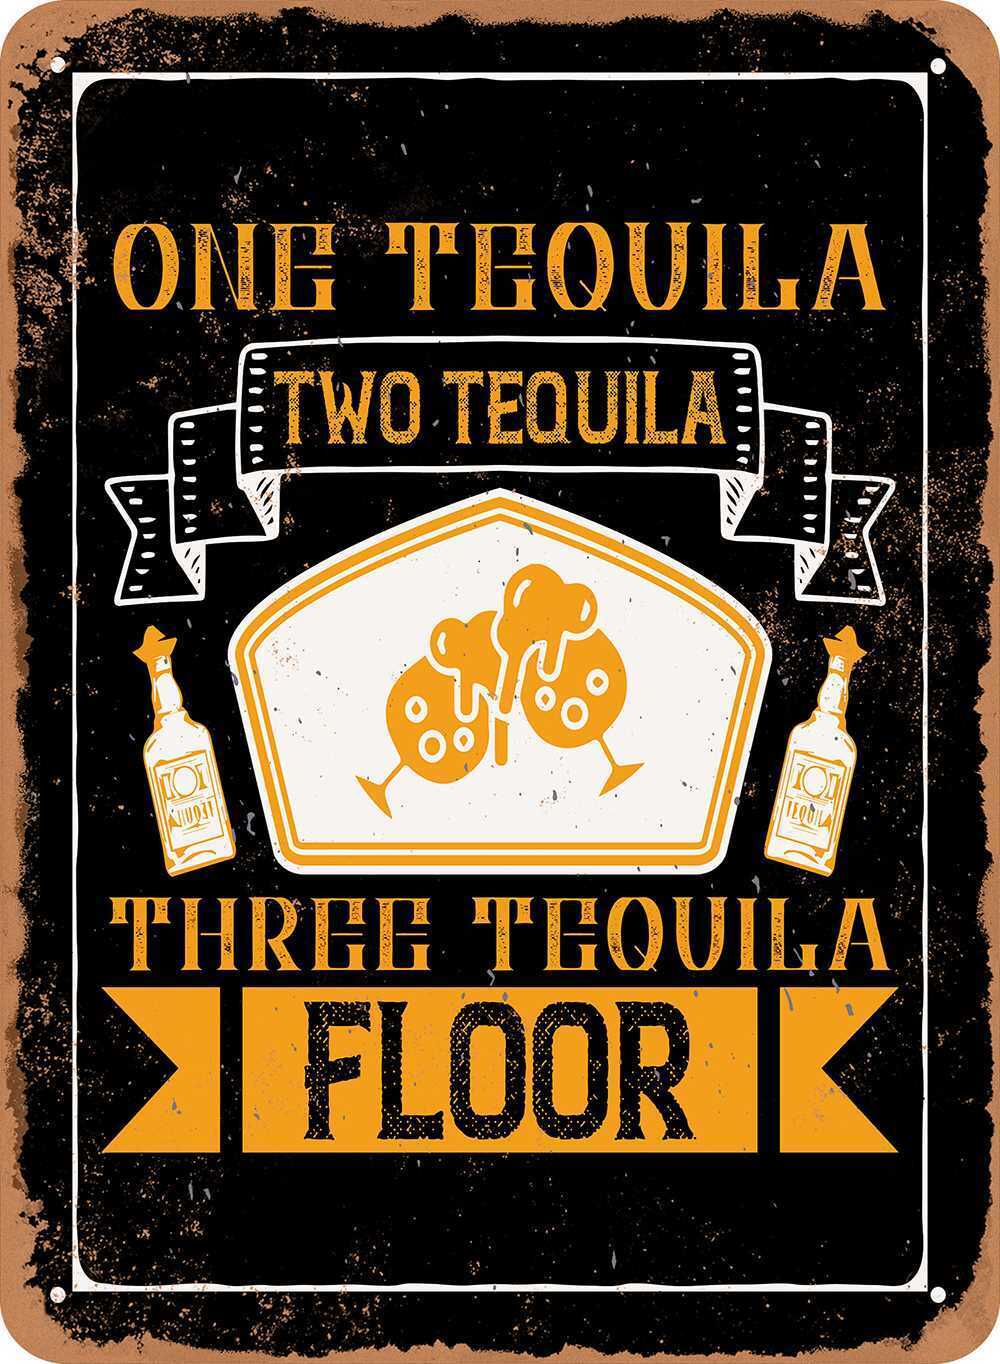 Metal Sign - One Tequila, Two Tequila, Three Tequila, Floor - Vintage Look